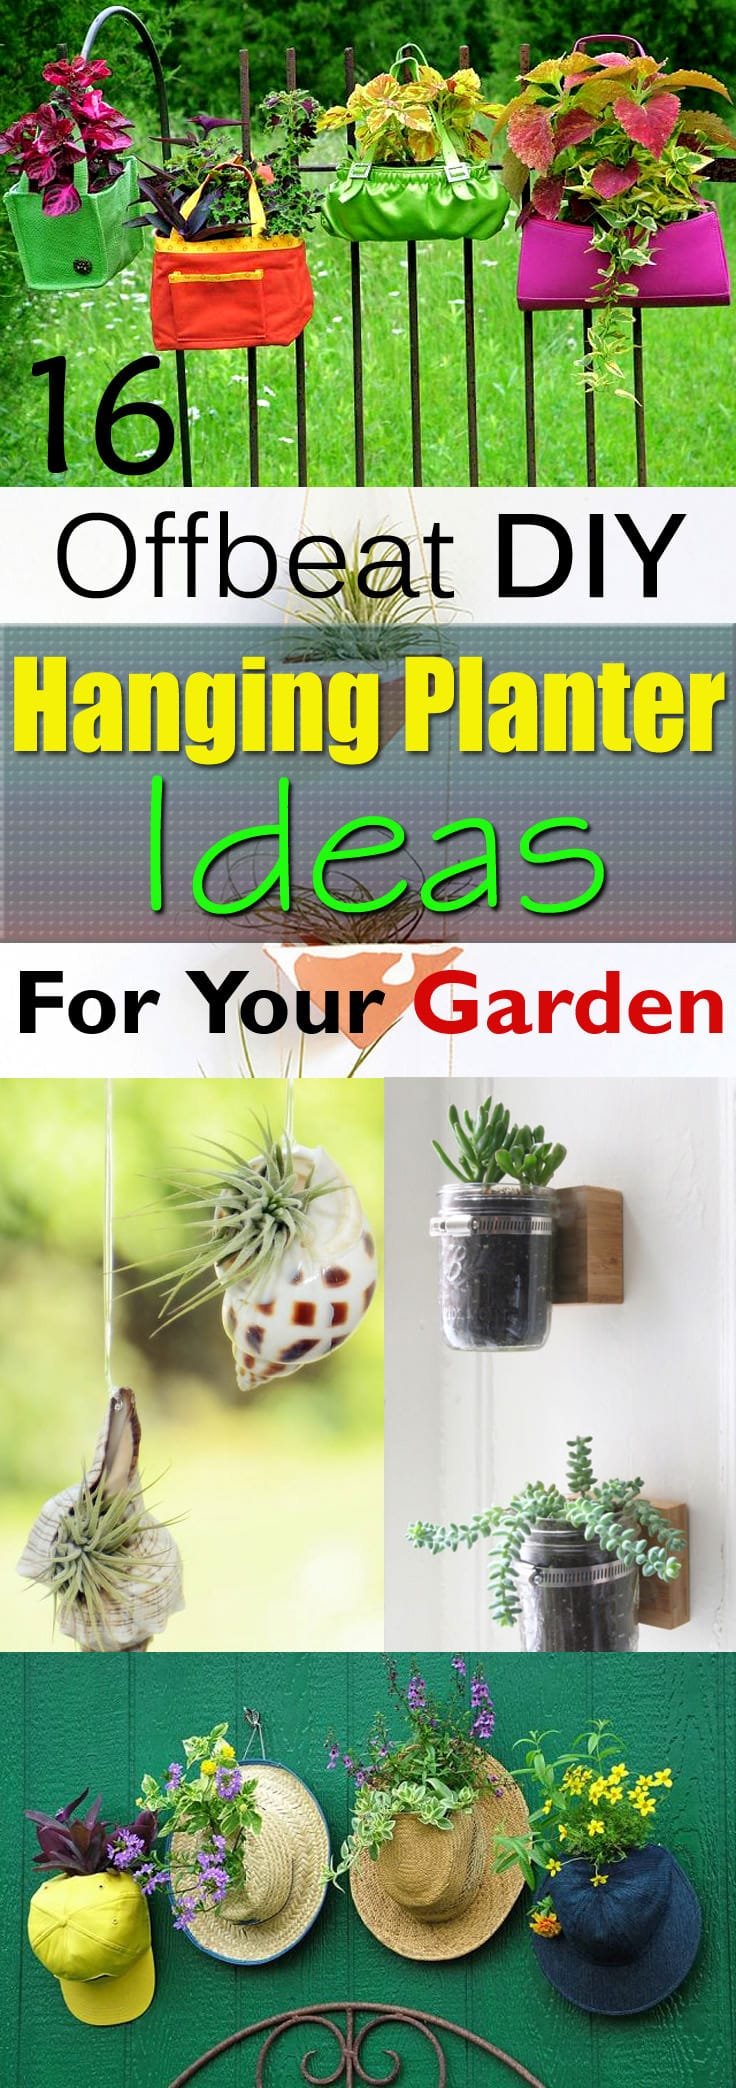 If you're looking for some OFFBEAT ideas for growing plants indoors or outdoors, these DIY hanging planter ideas are worth looking at!